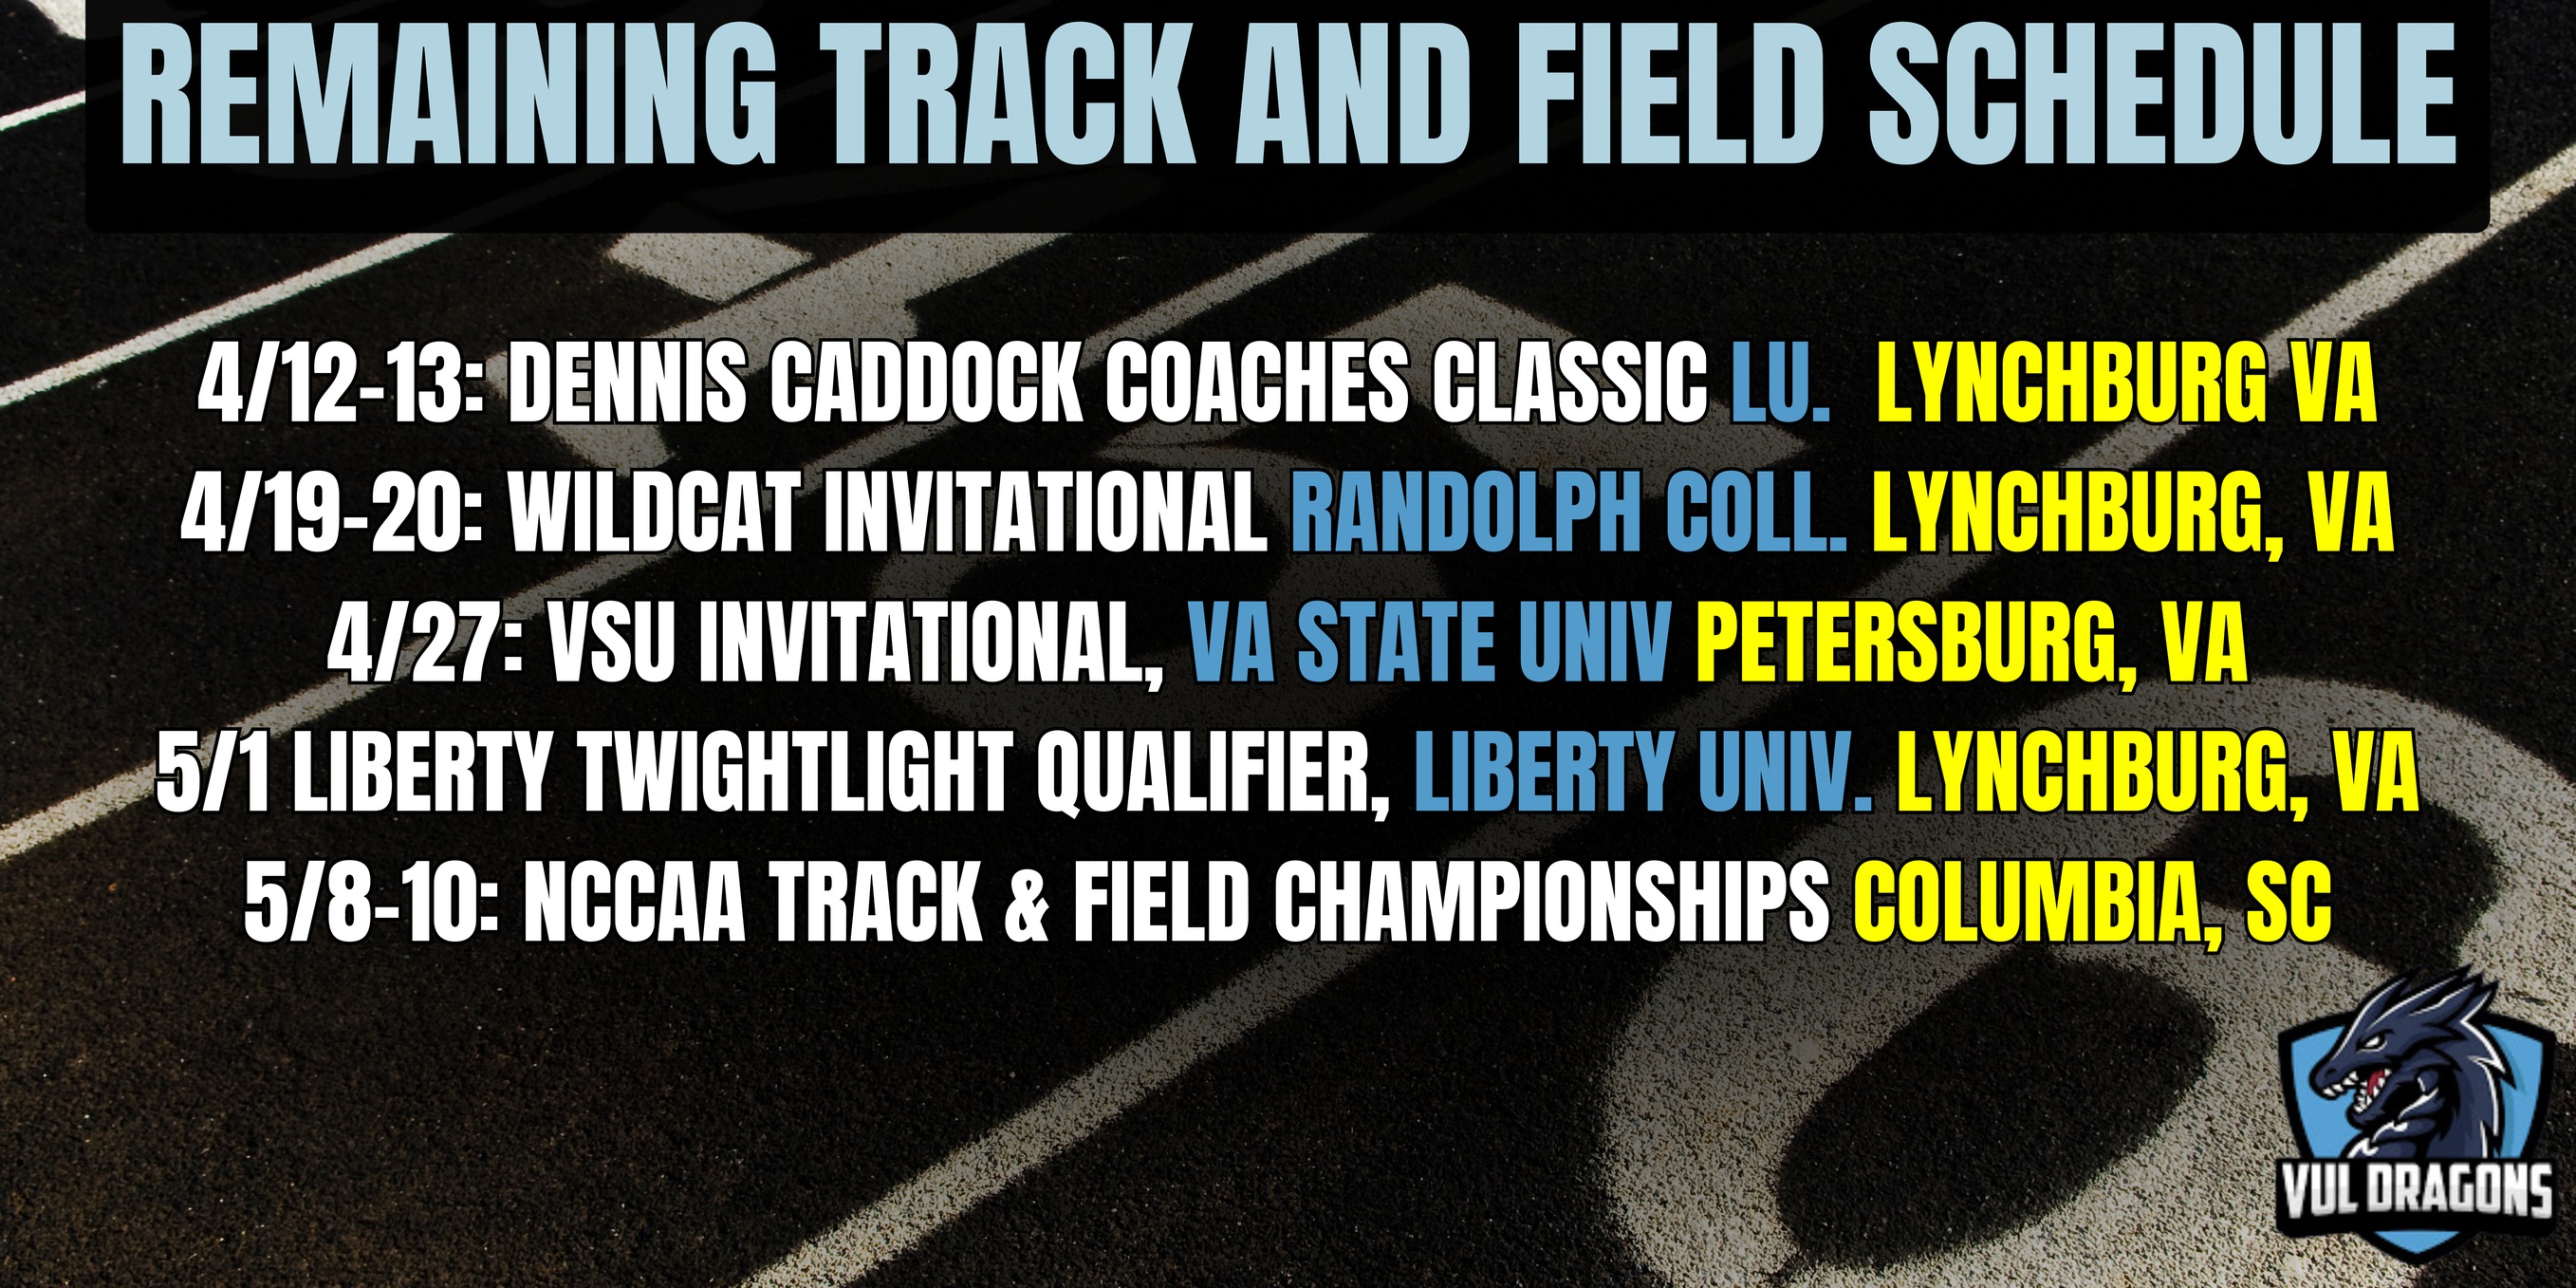 Checkout the remaining schedule for our track and field program !!